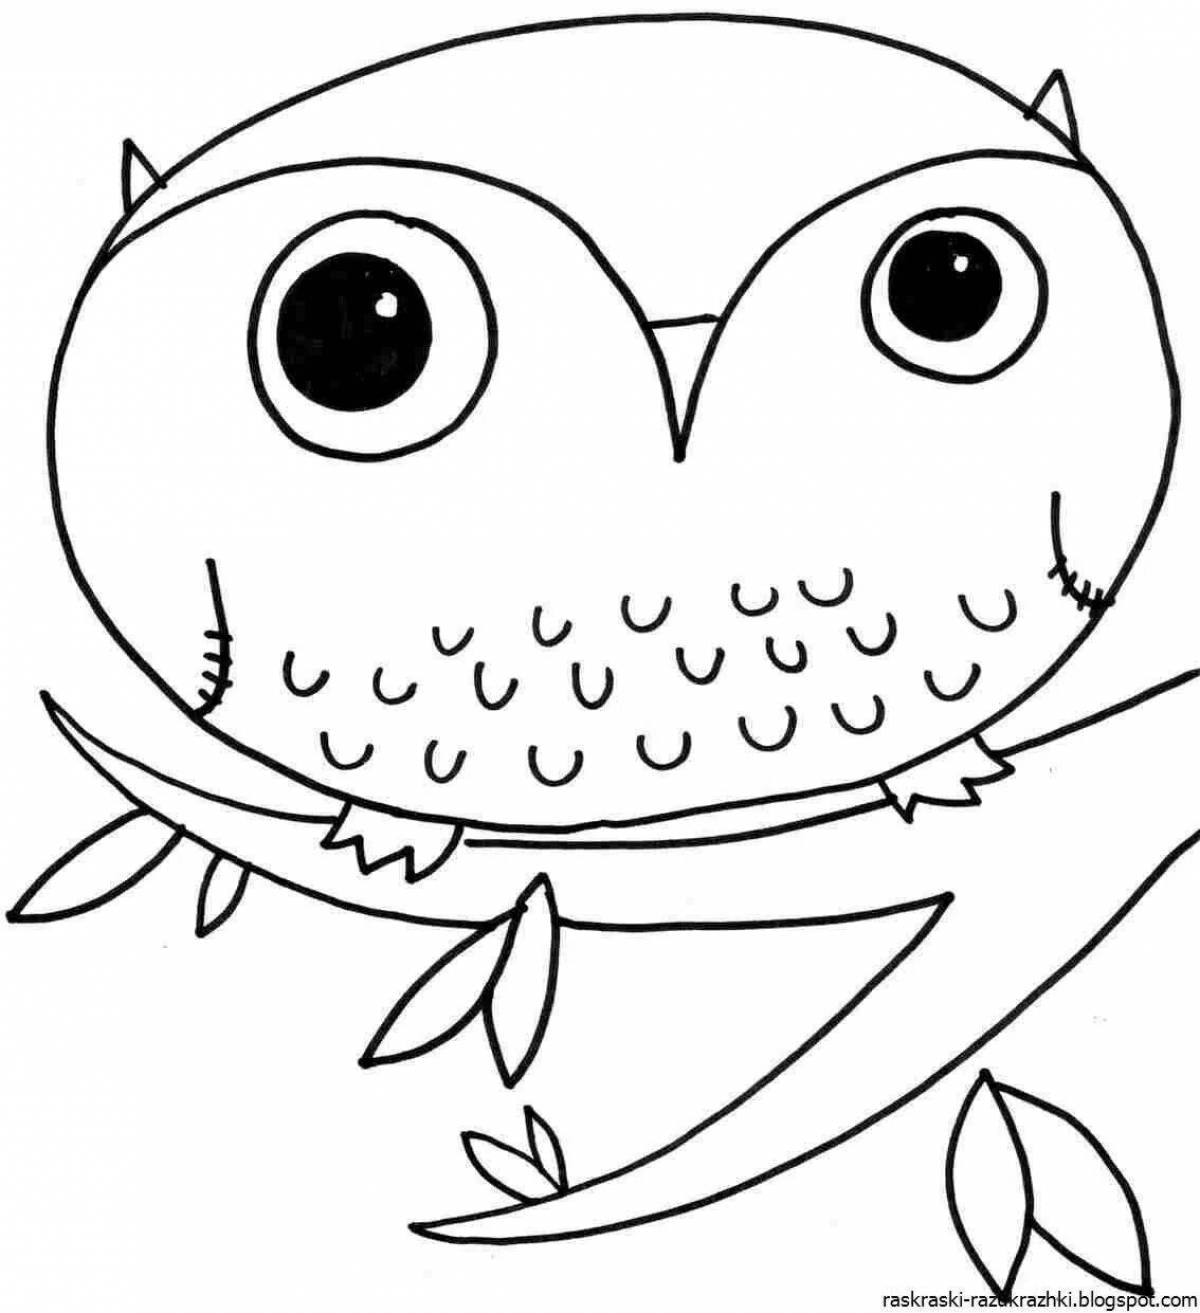 Adorable cute owl coloring page